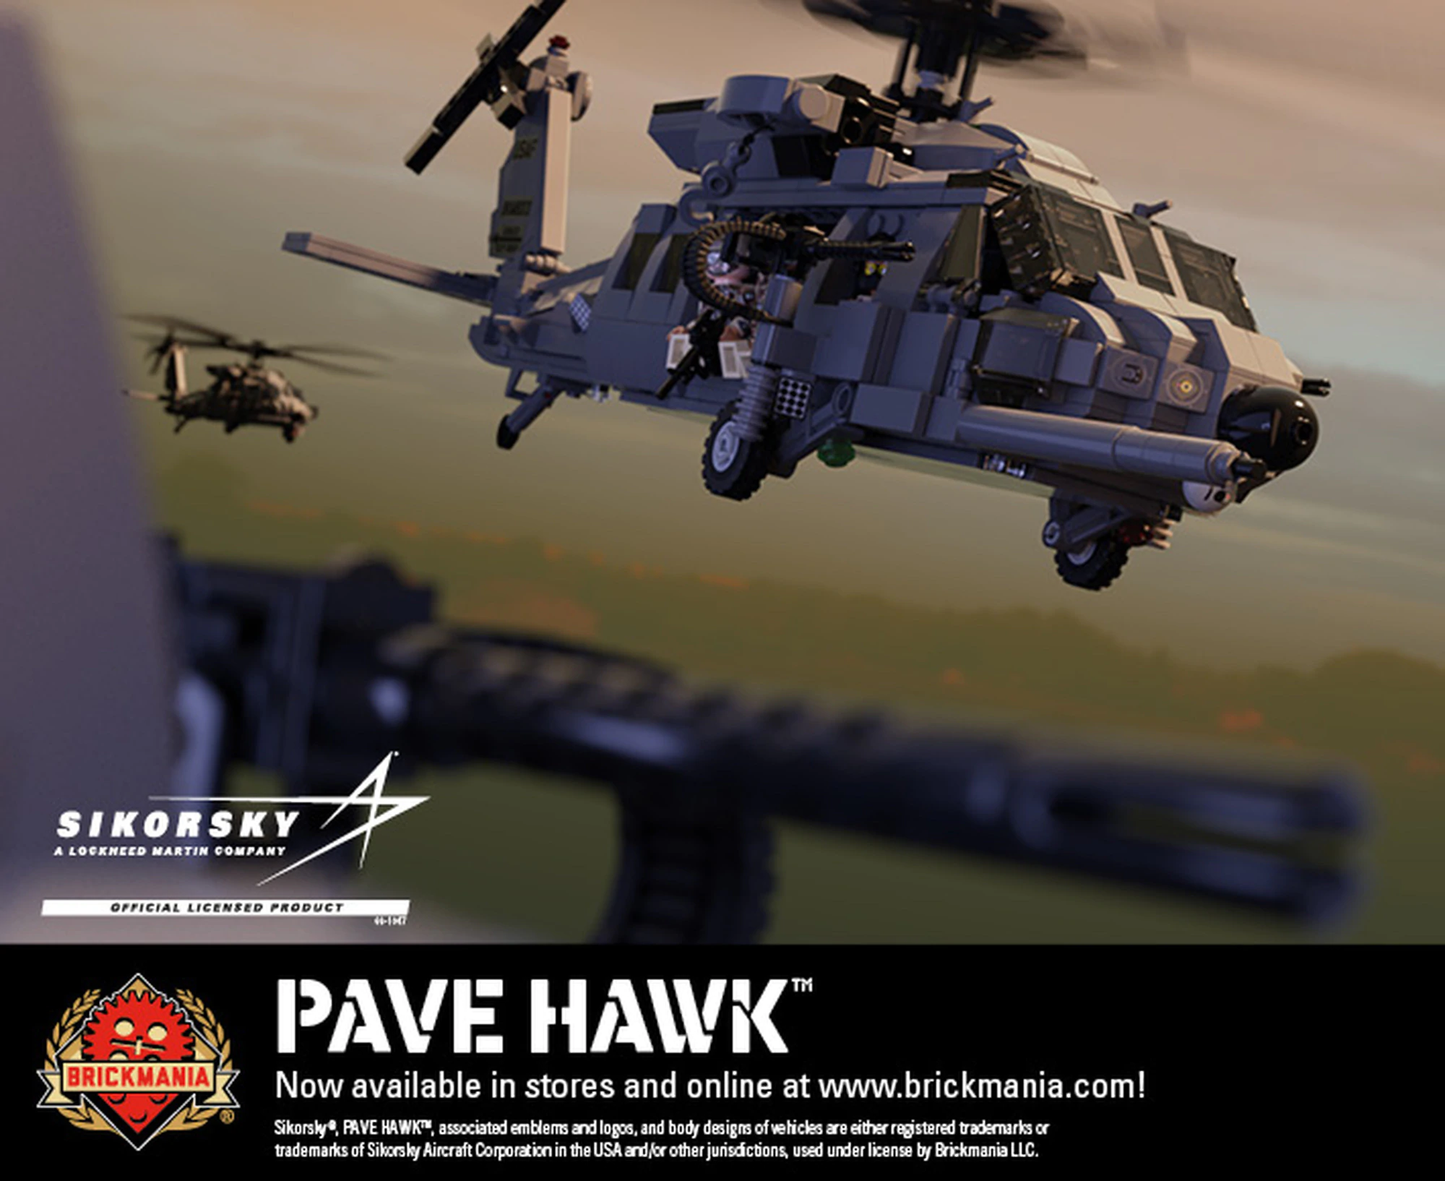 PAVE HAWK™ - Combat Search & Rescue Helicopter - MOMCOM inc.